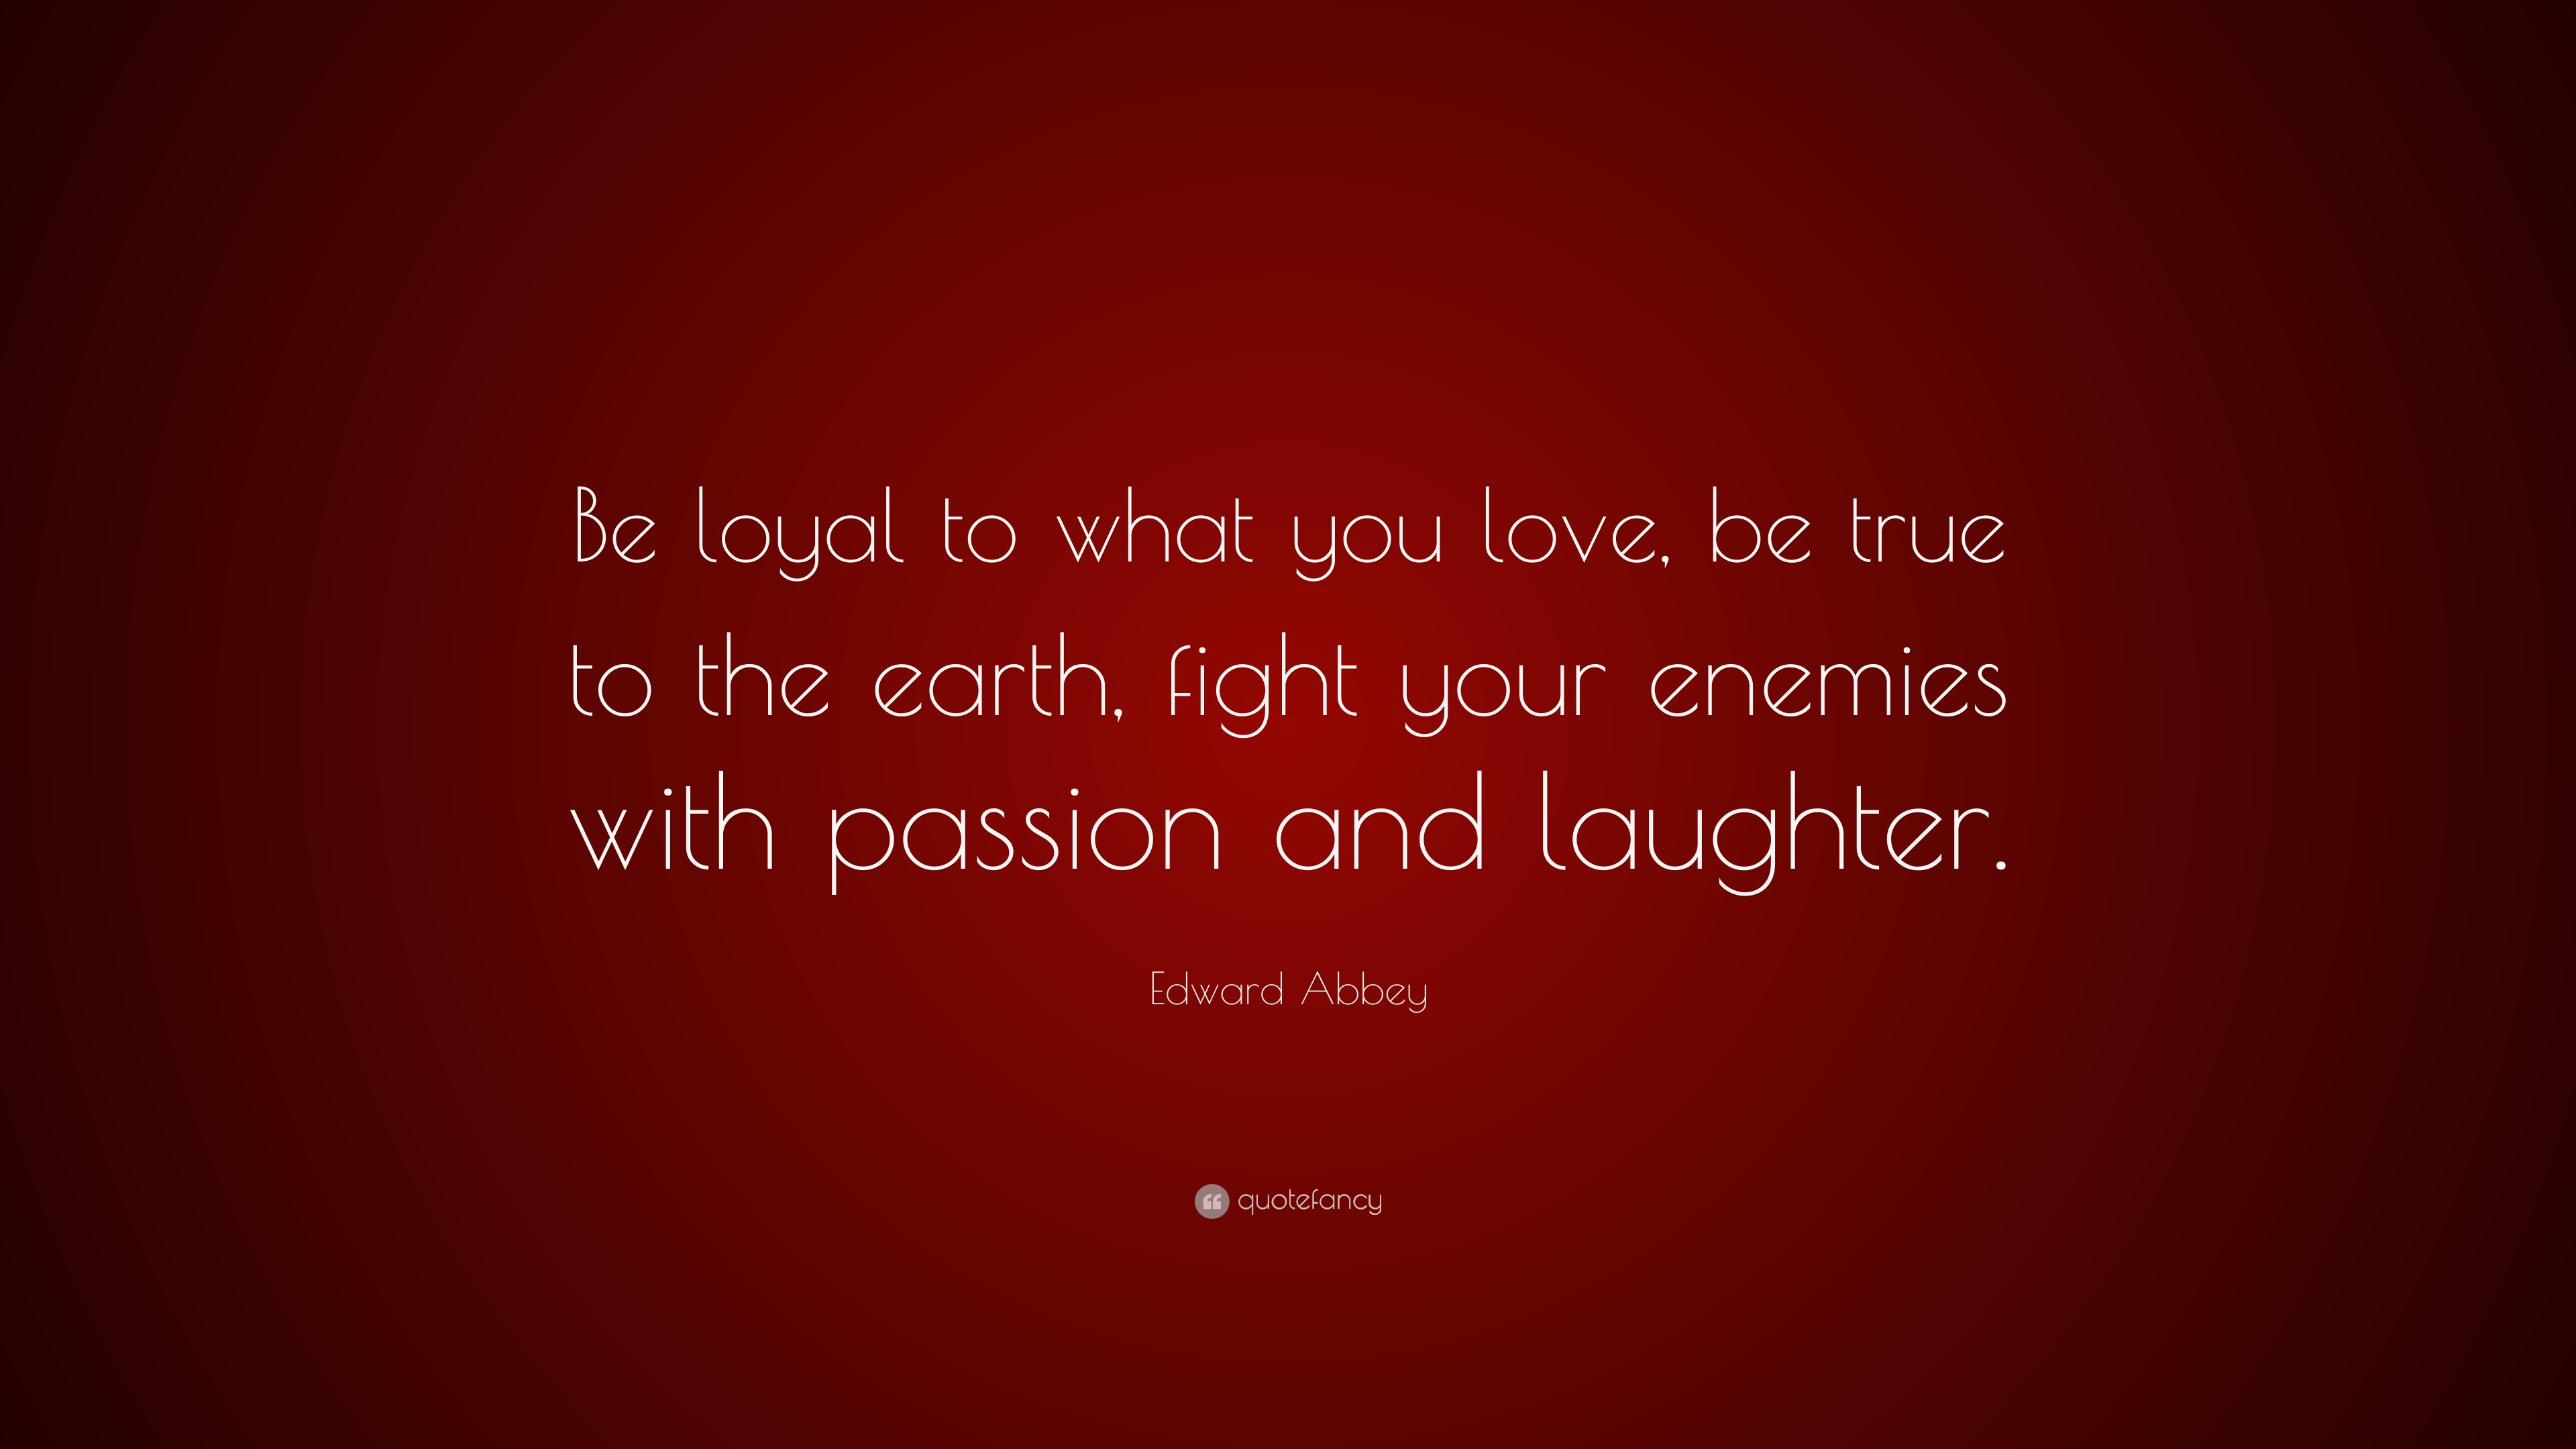 Edward Abbey Quote: “Be loyal to what you love, be true to the earth ...